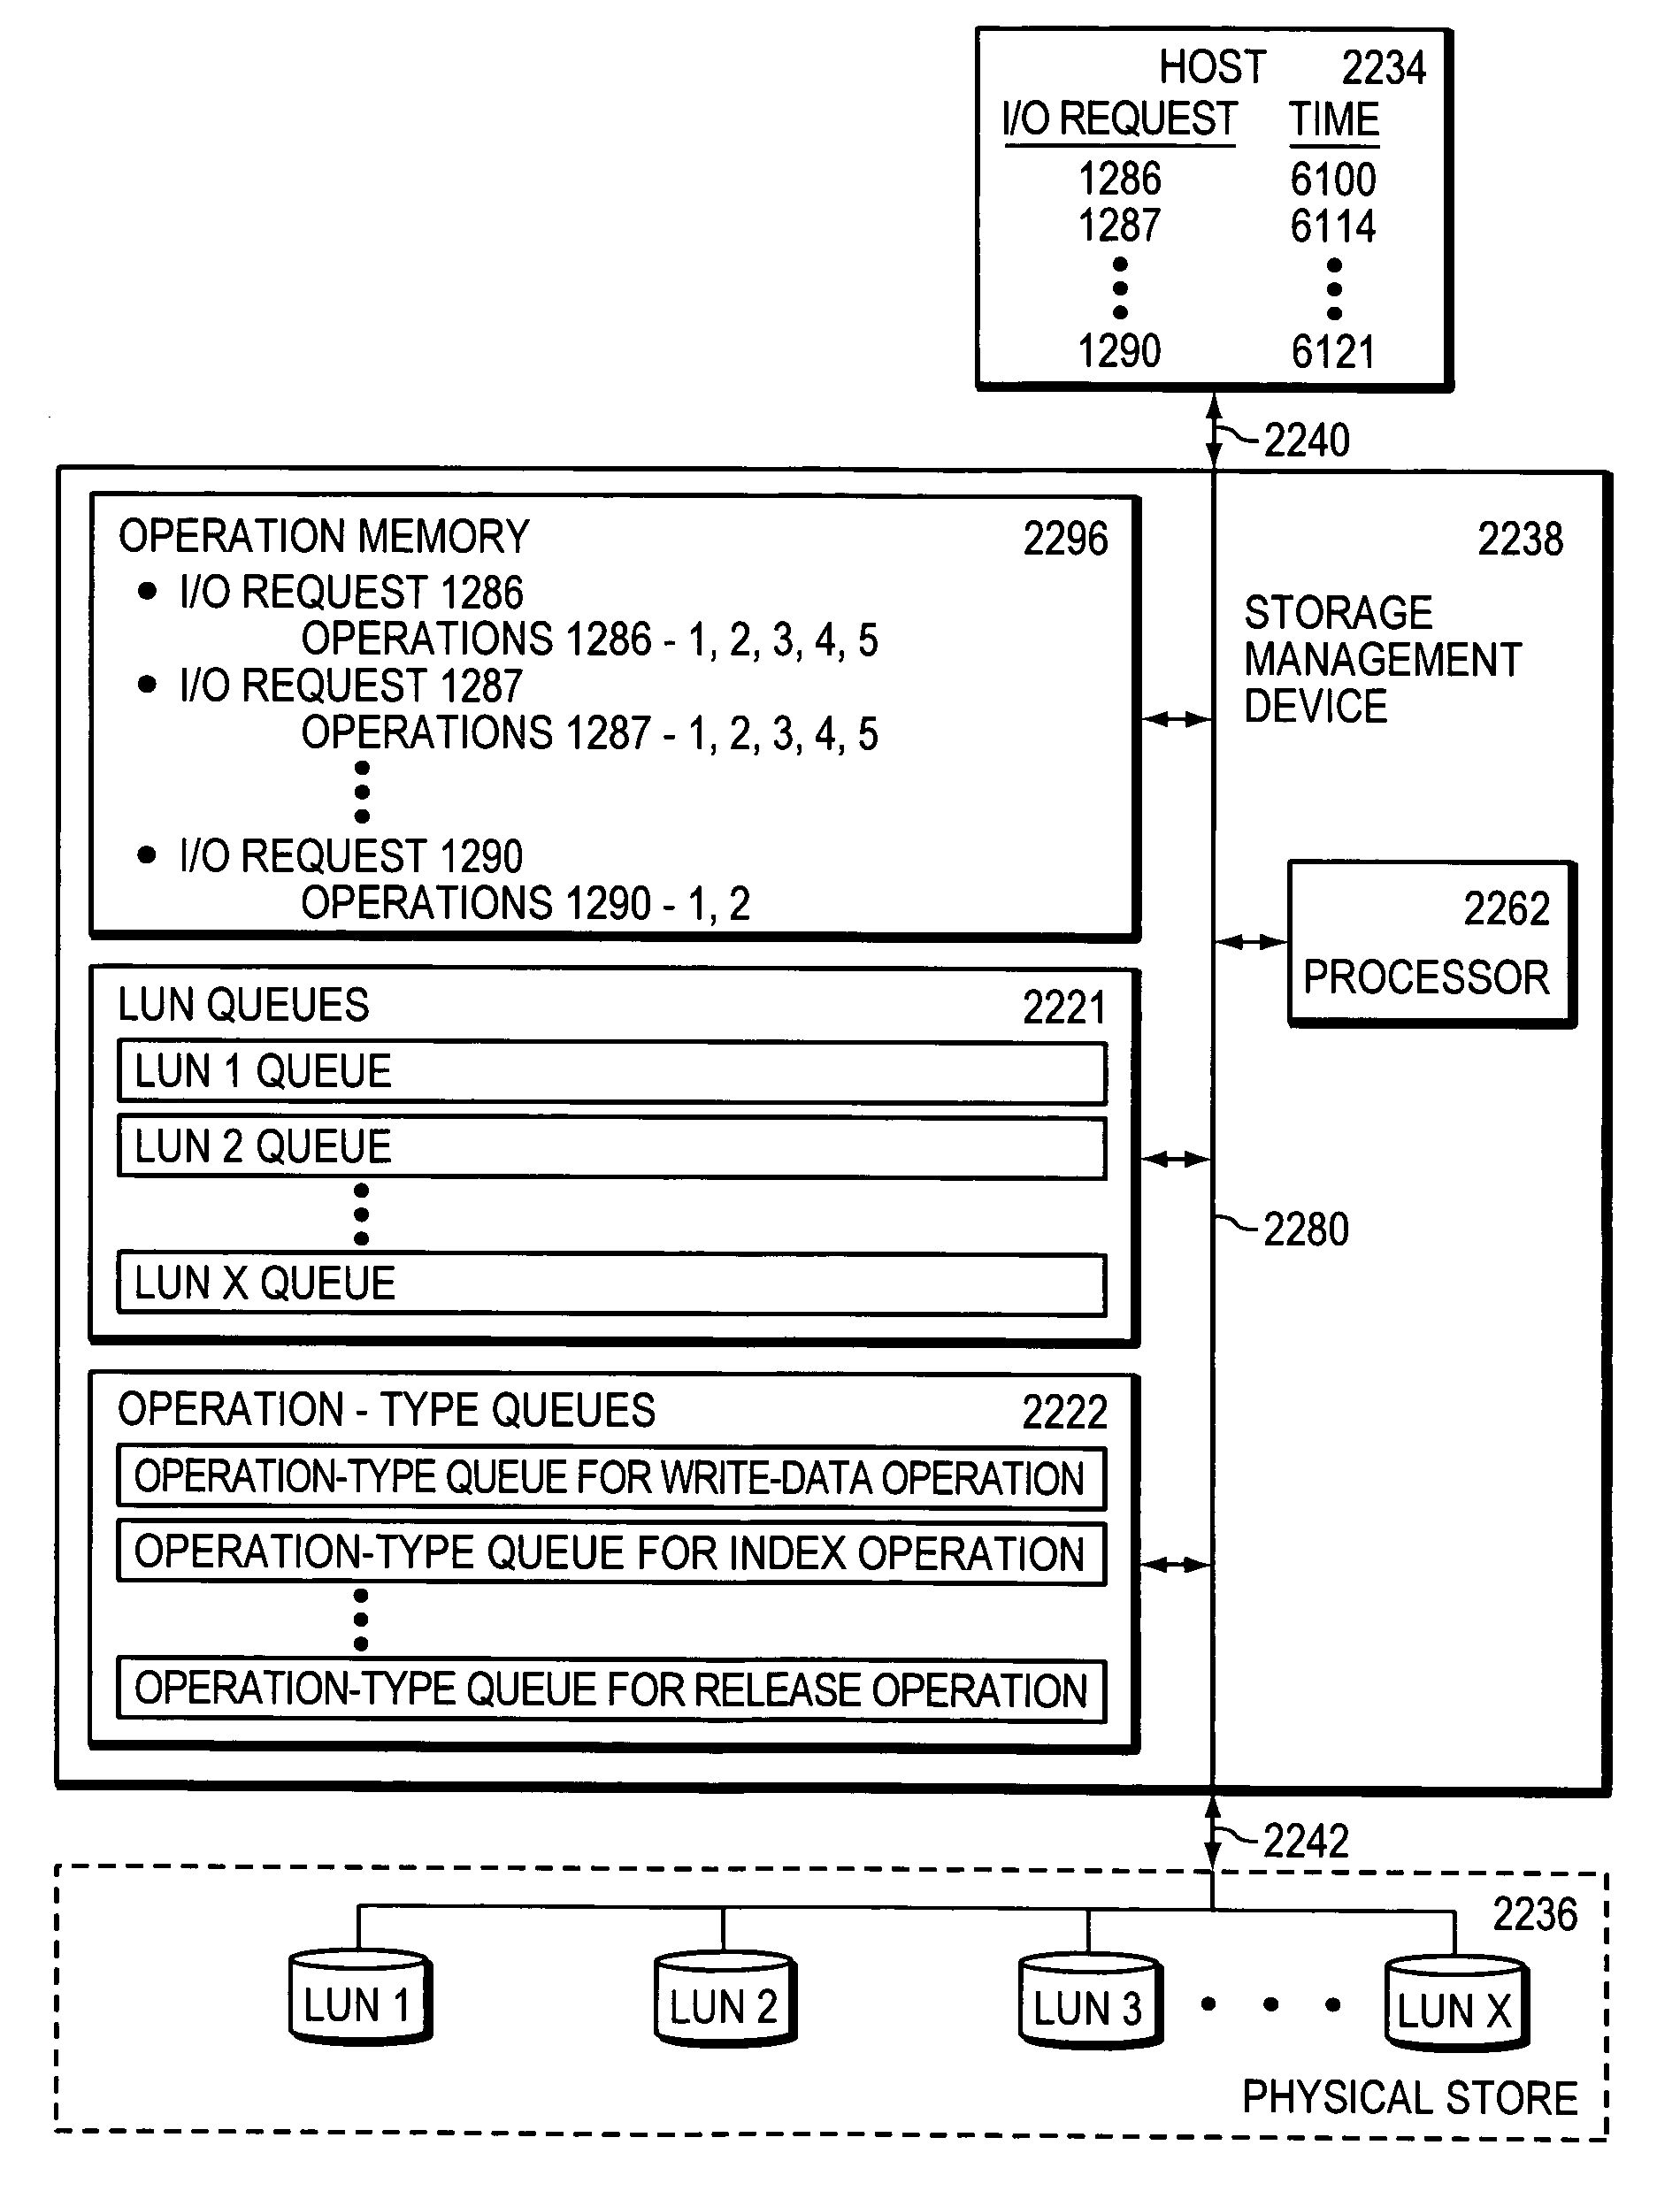 Generation and use of a time map for accessing a prior image of a storage device